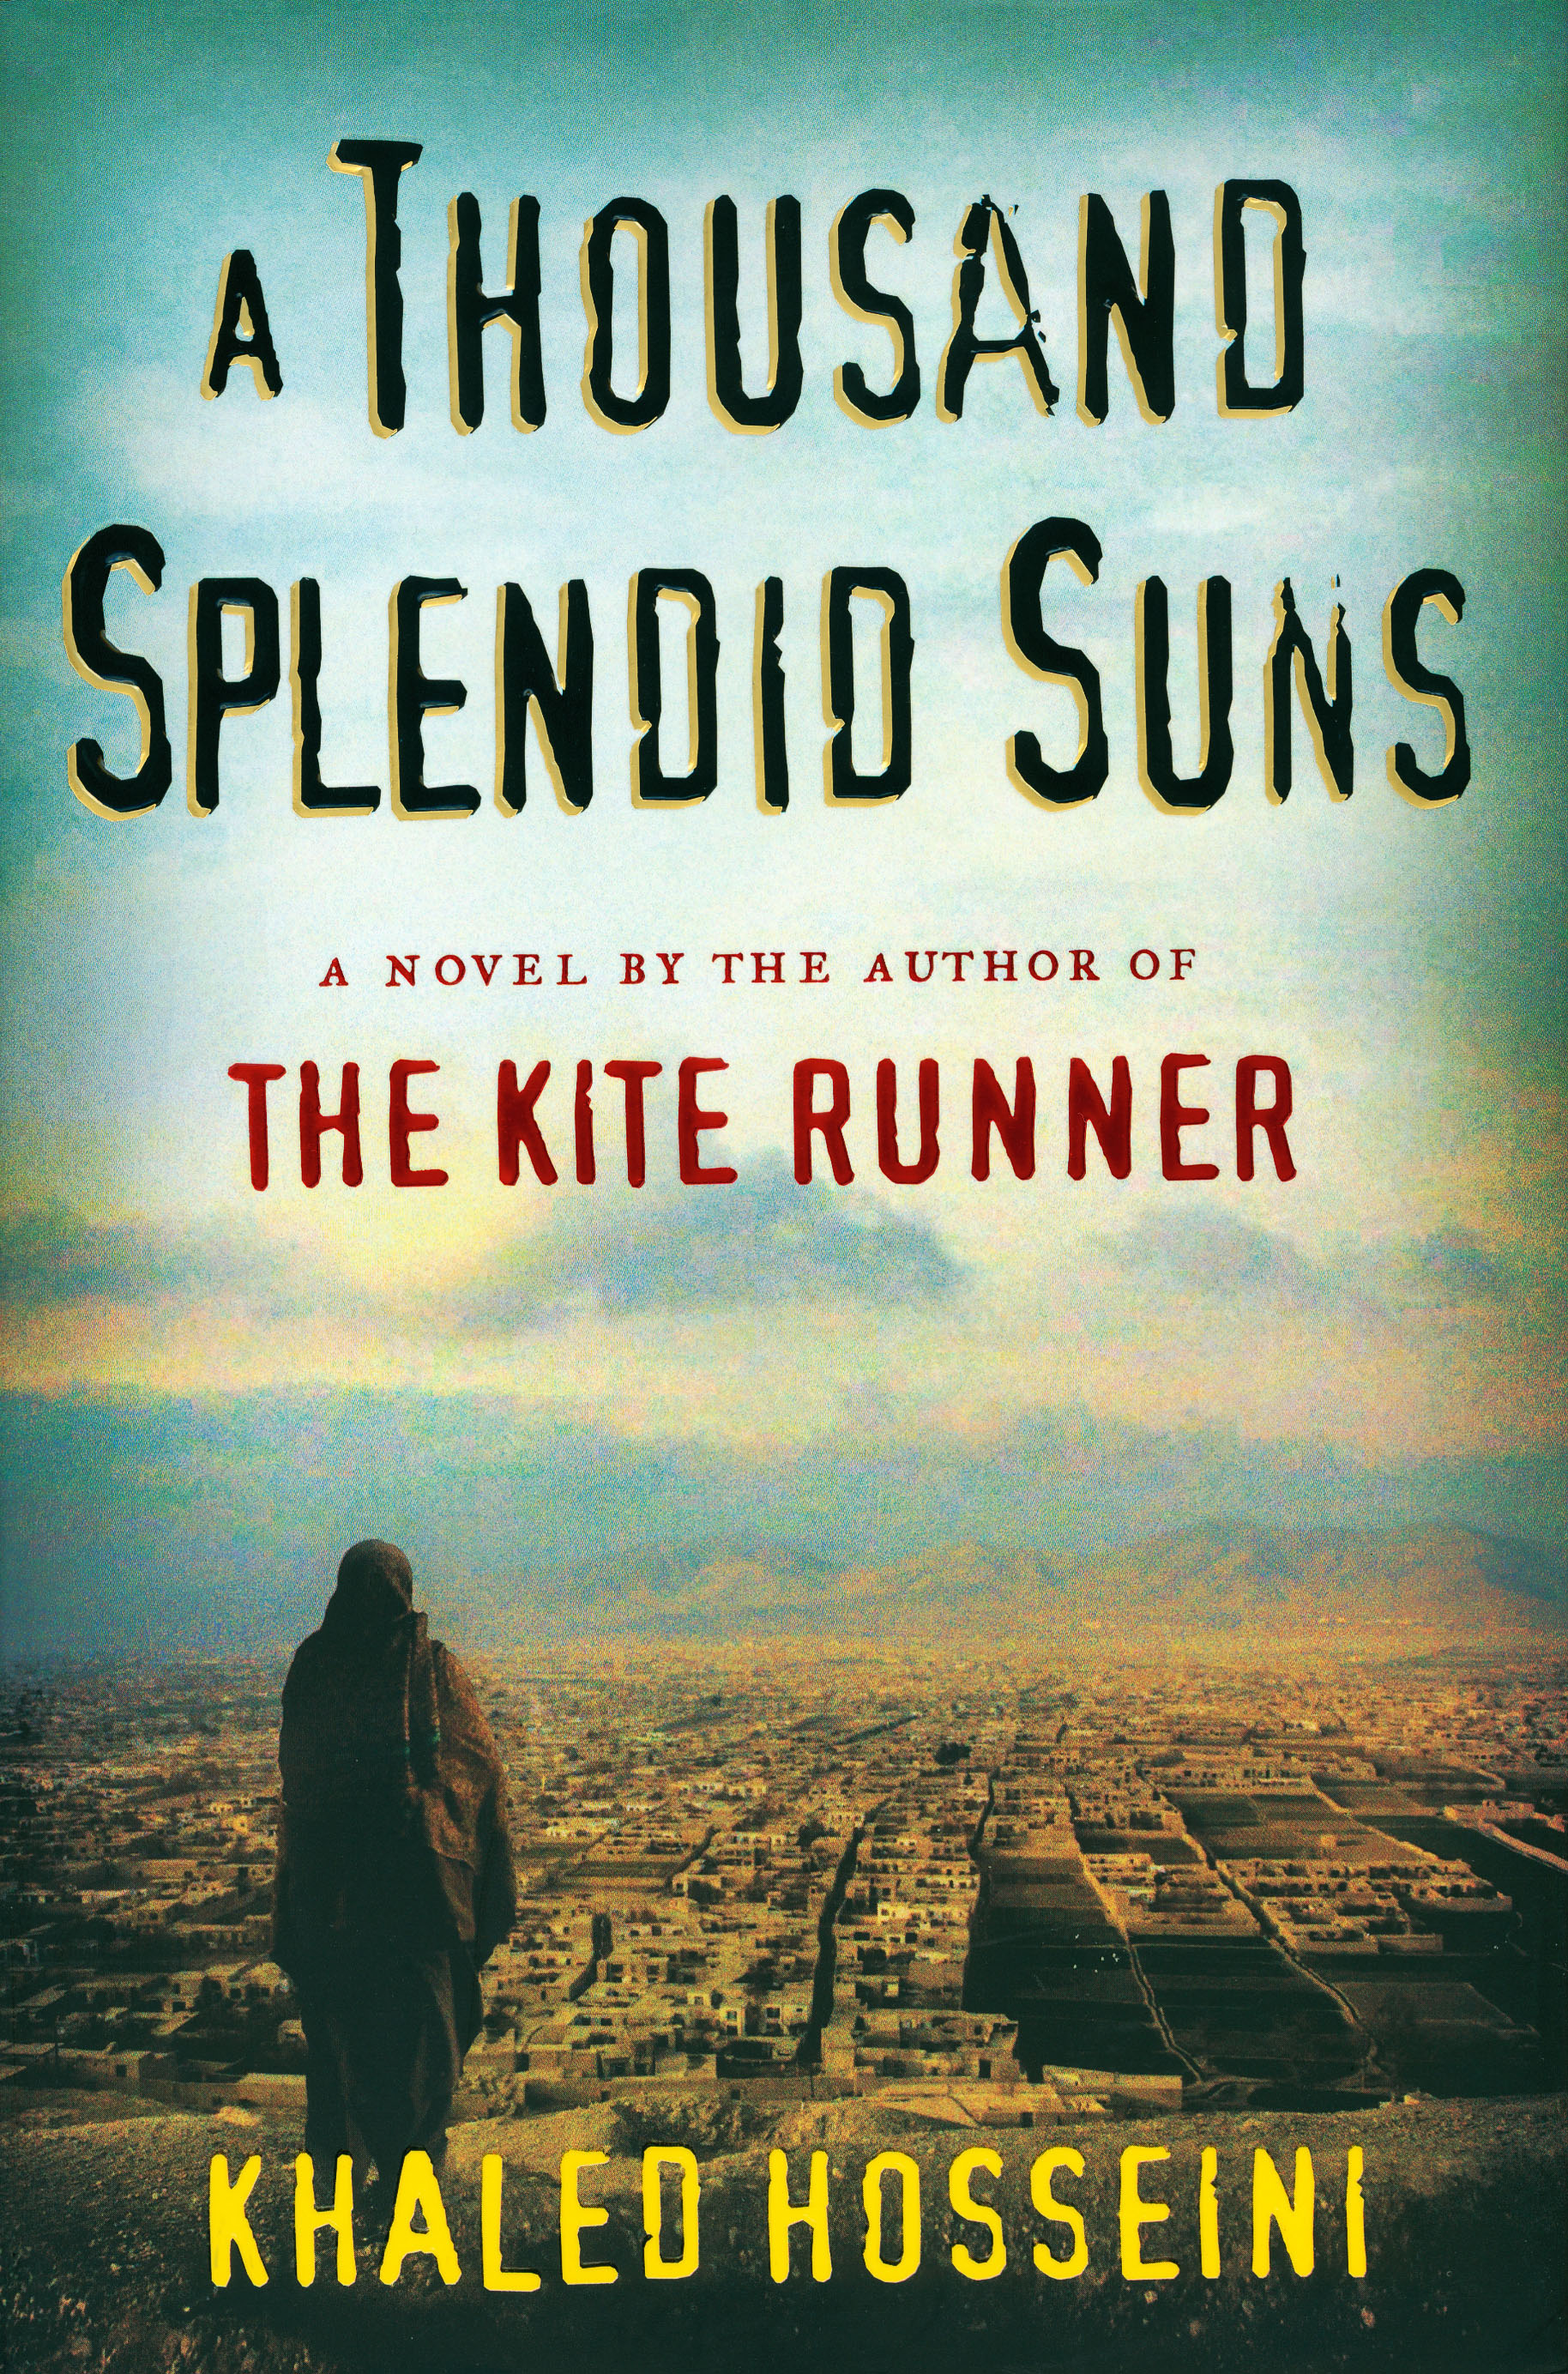 Khaled Hosseini's second novel, A Thousand Splendid Suns, confirmed the promise shown by his first book.